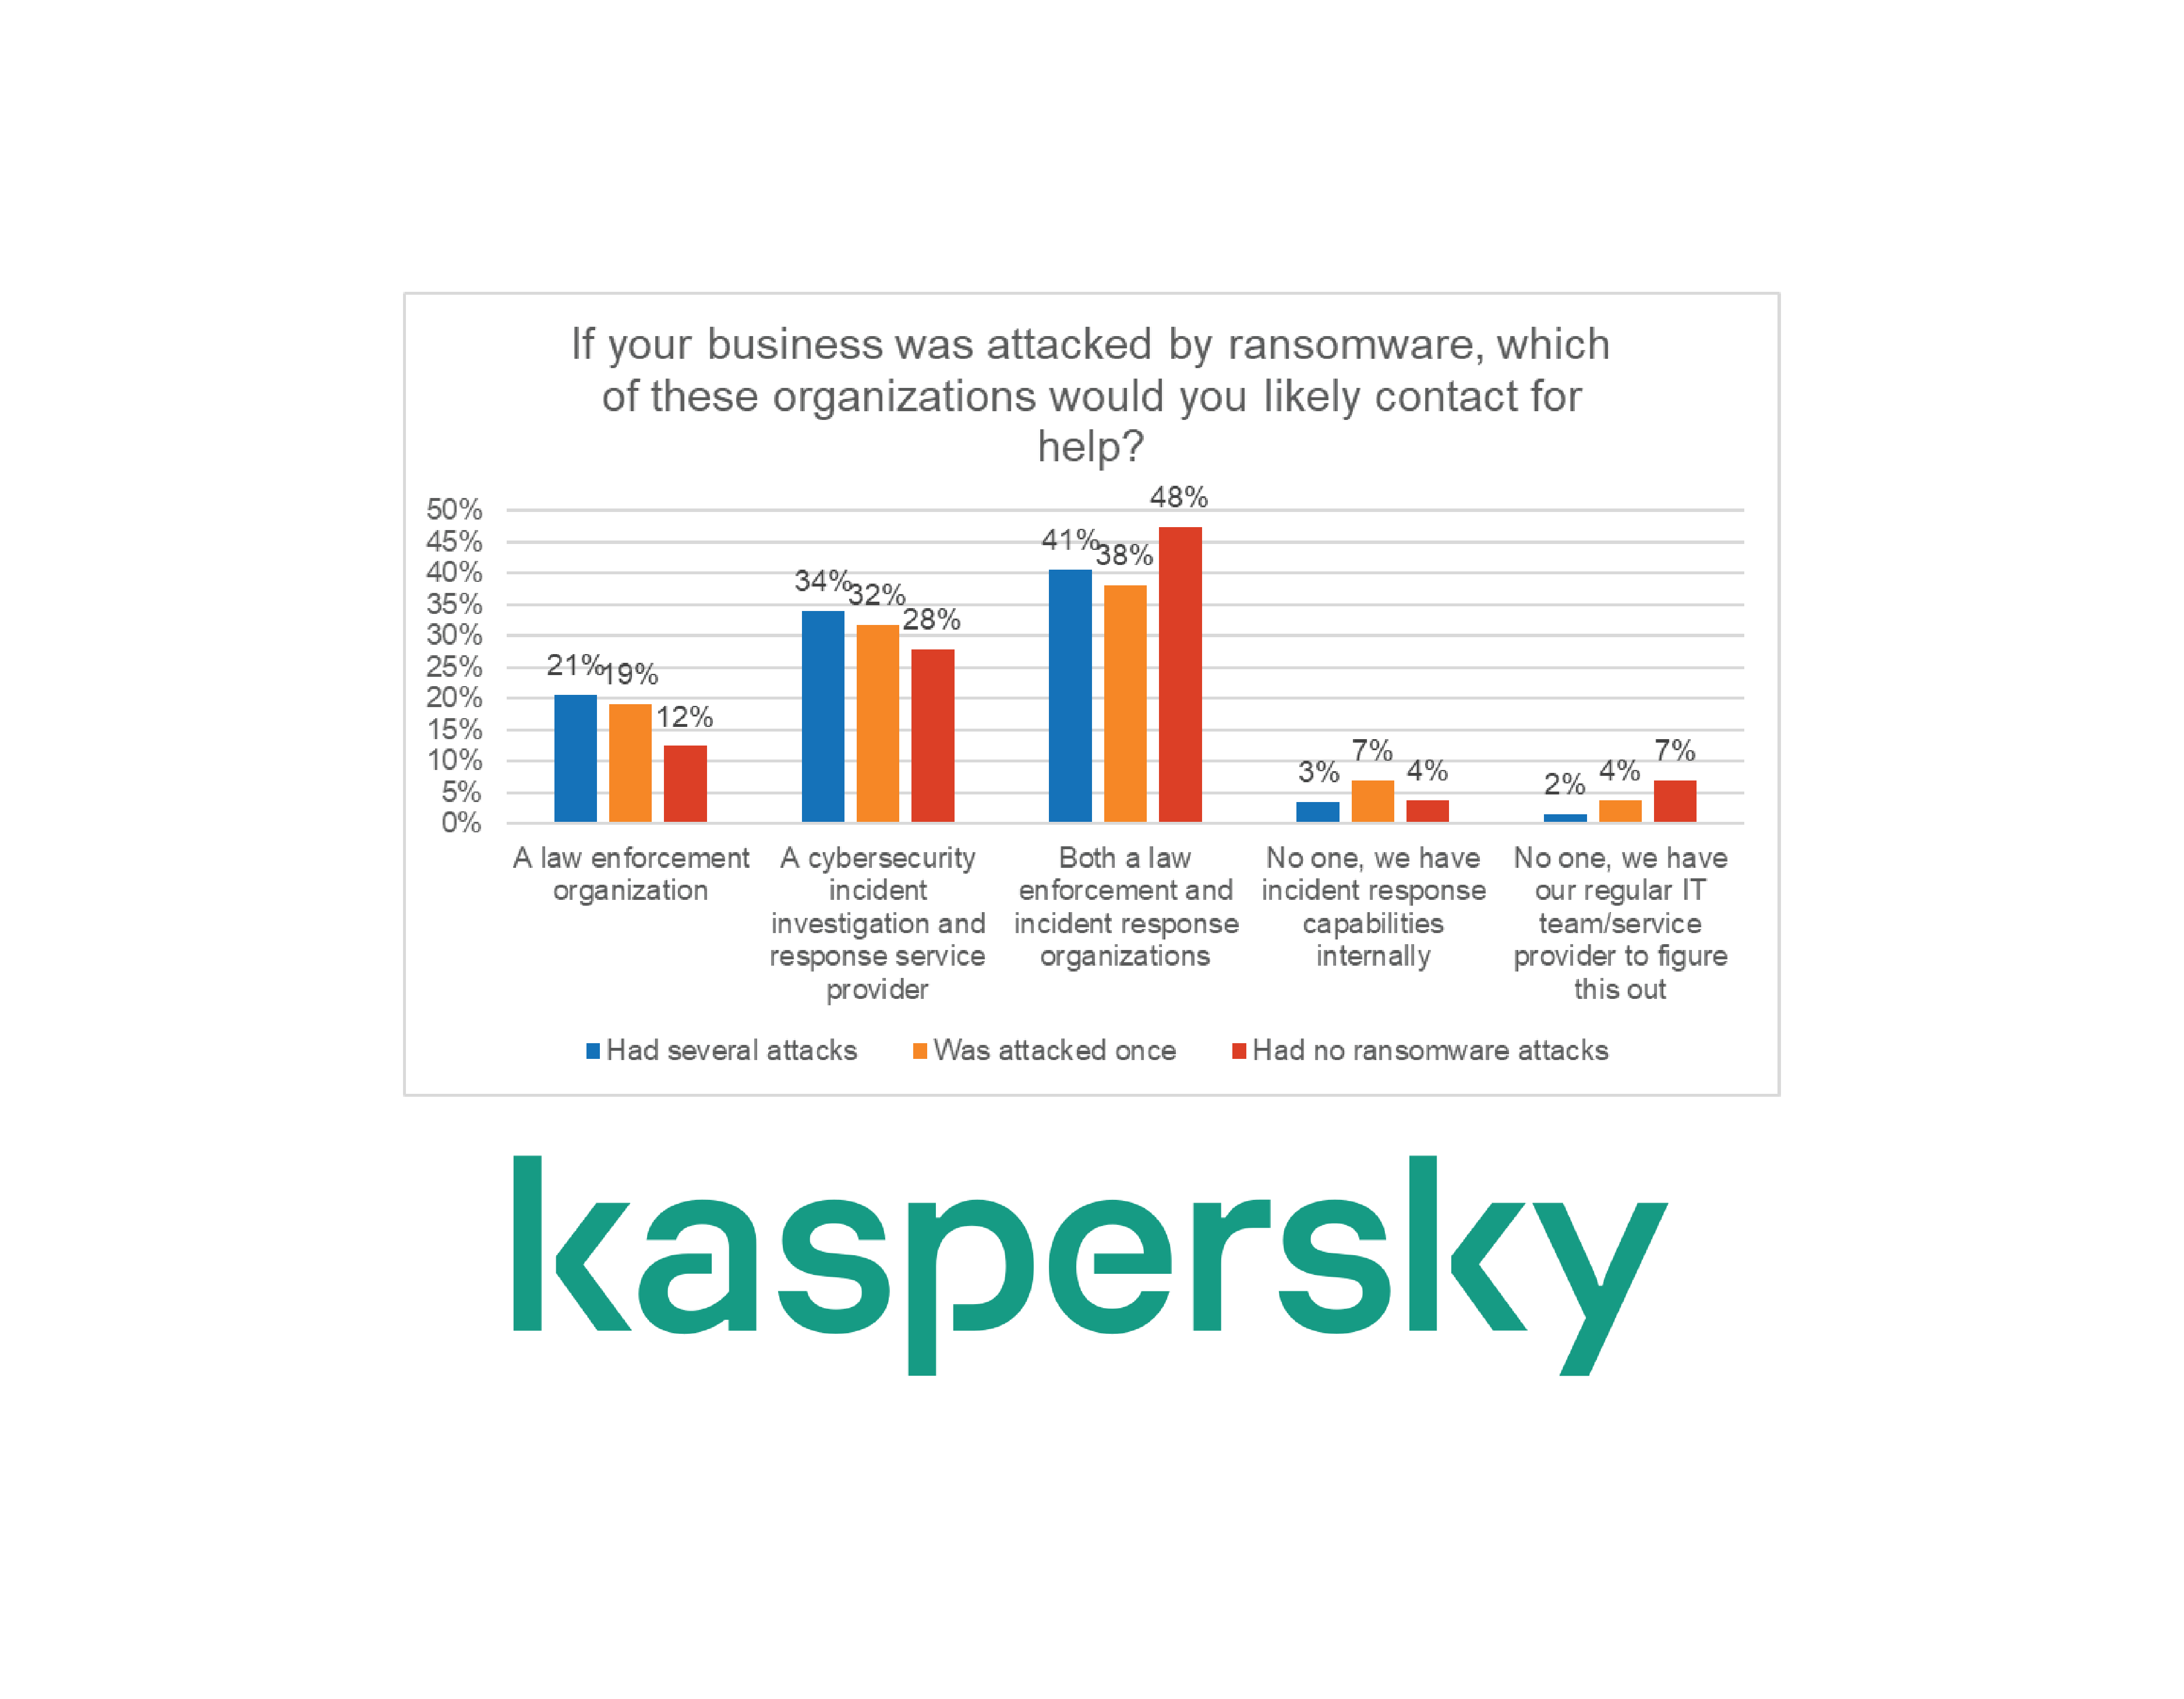 Kaspersky launches online Incident Response training course aimed at improving skills for responding to cyberattacks including ransomware